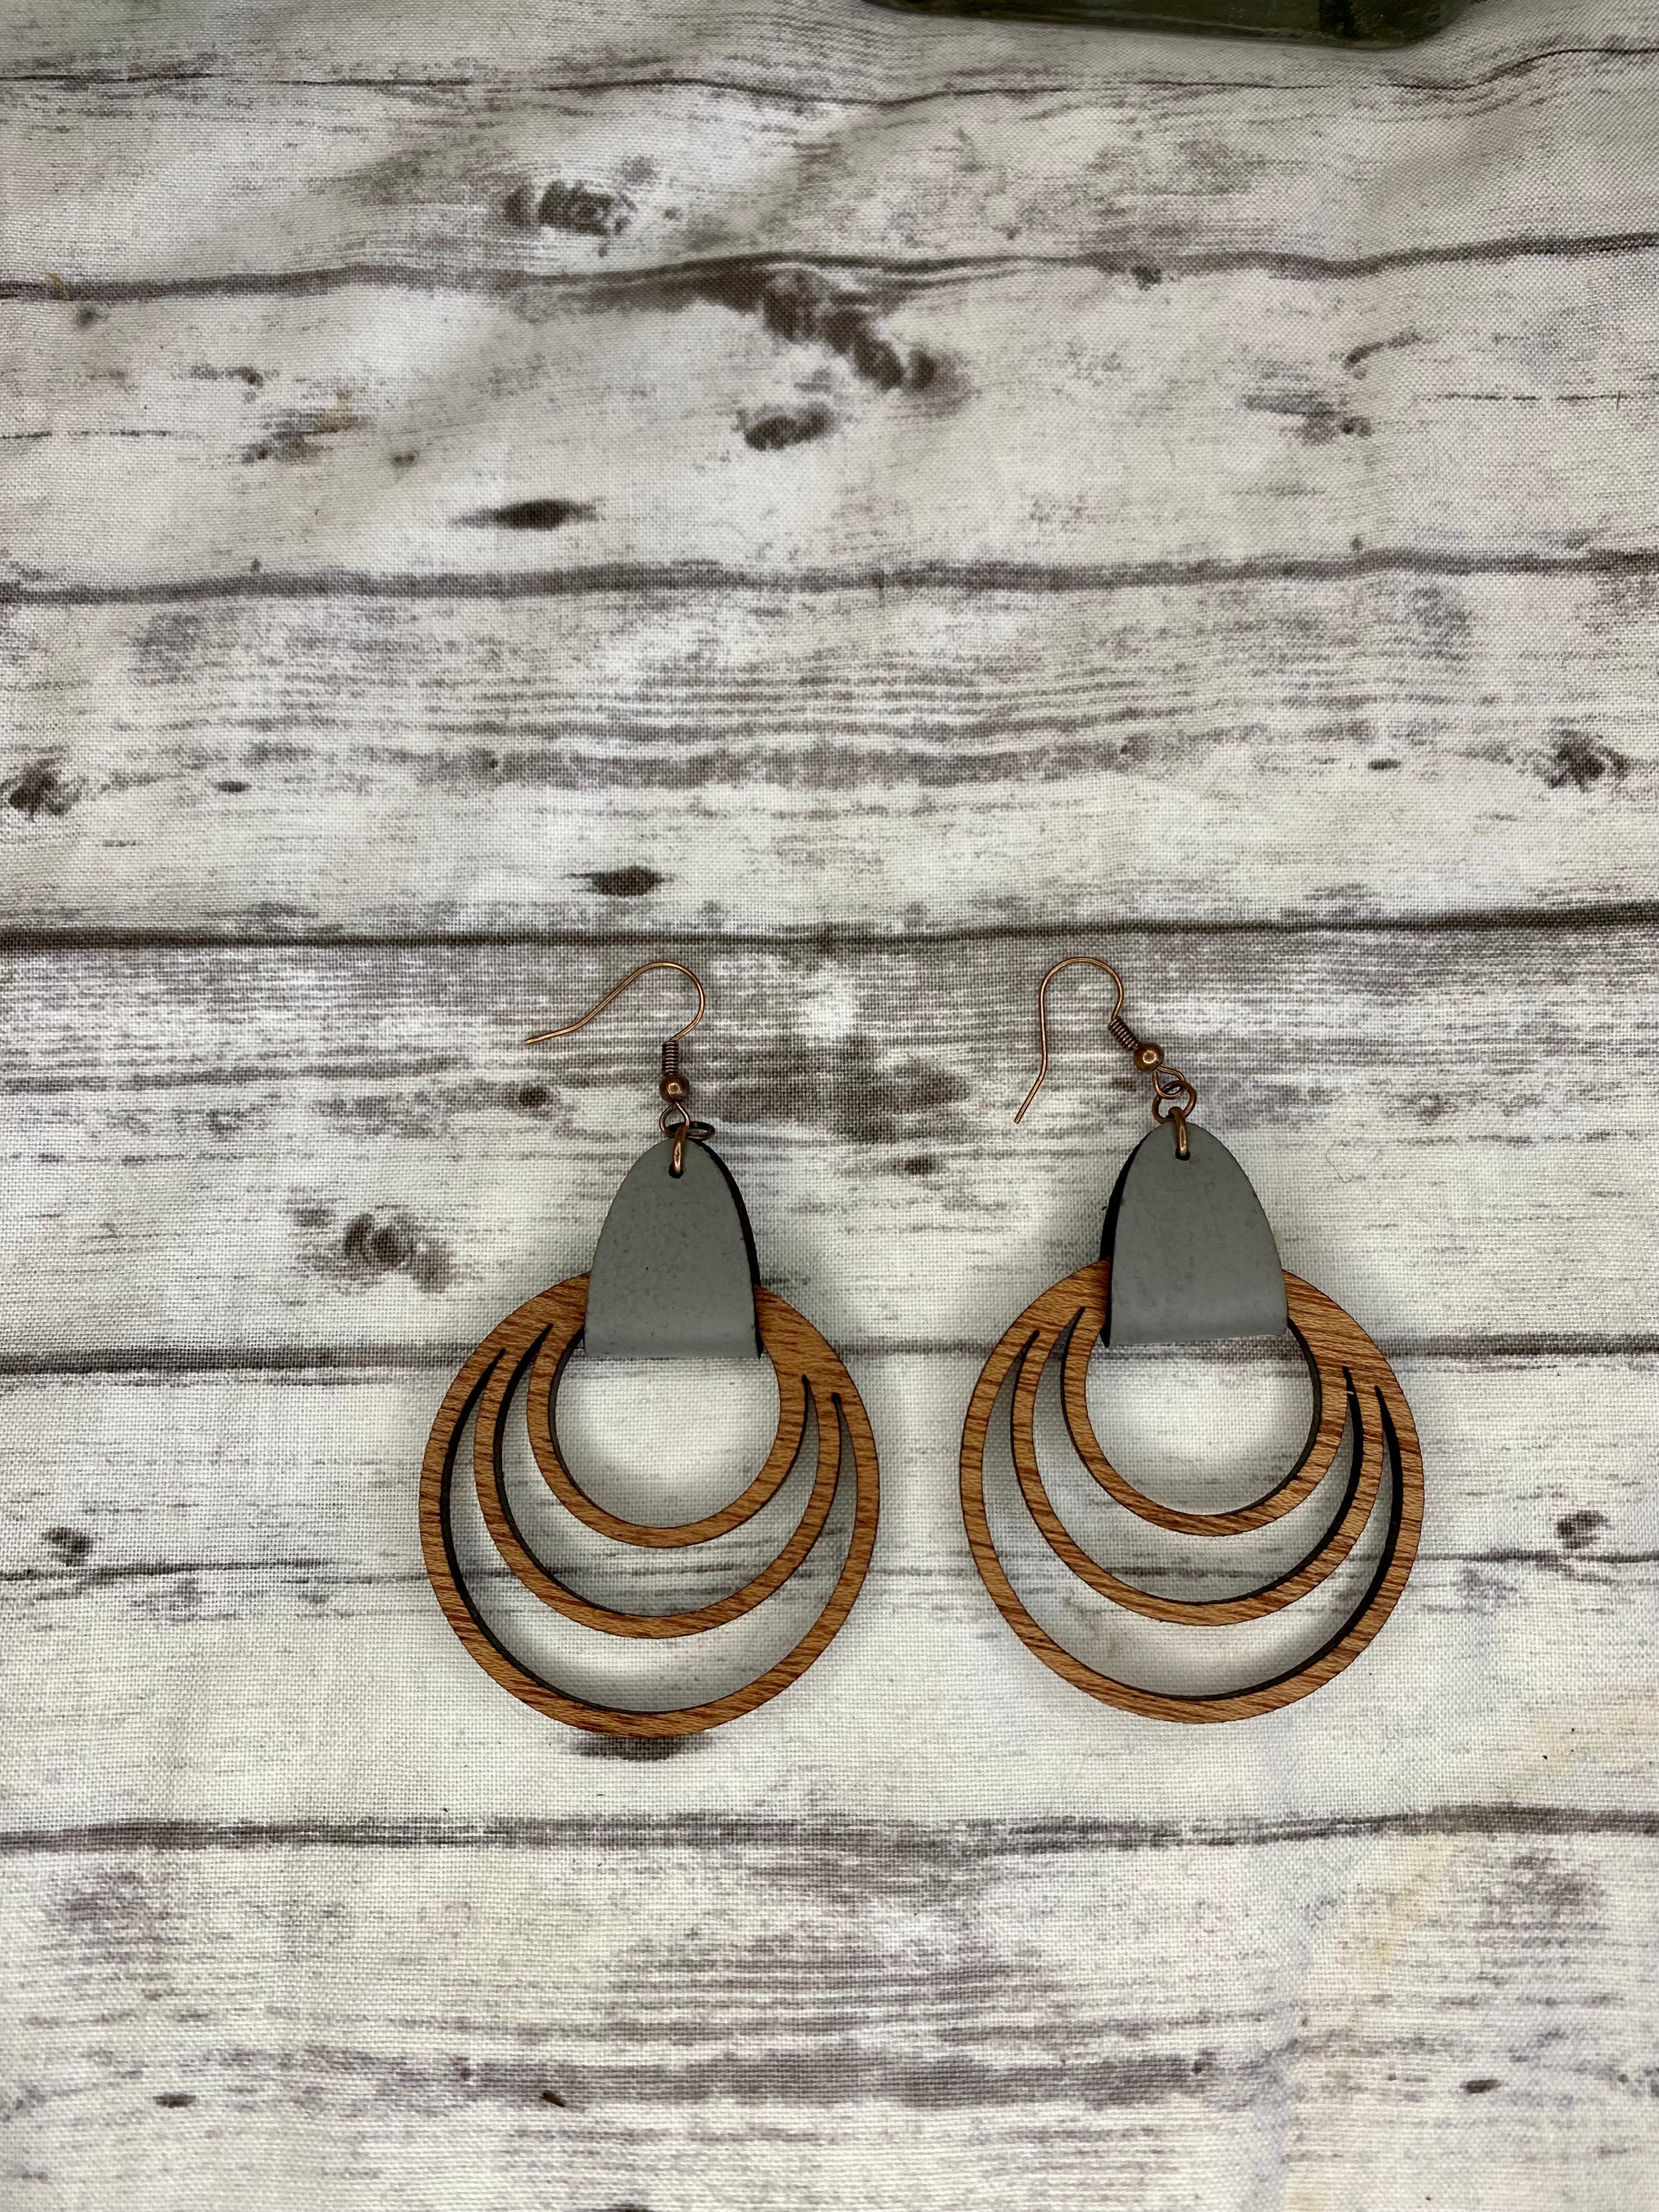 Loops and leather earrings